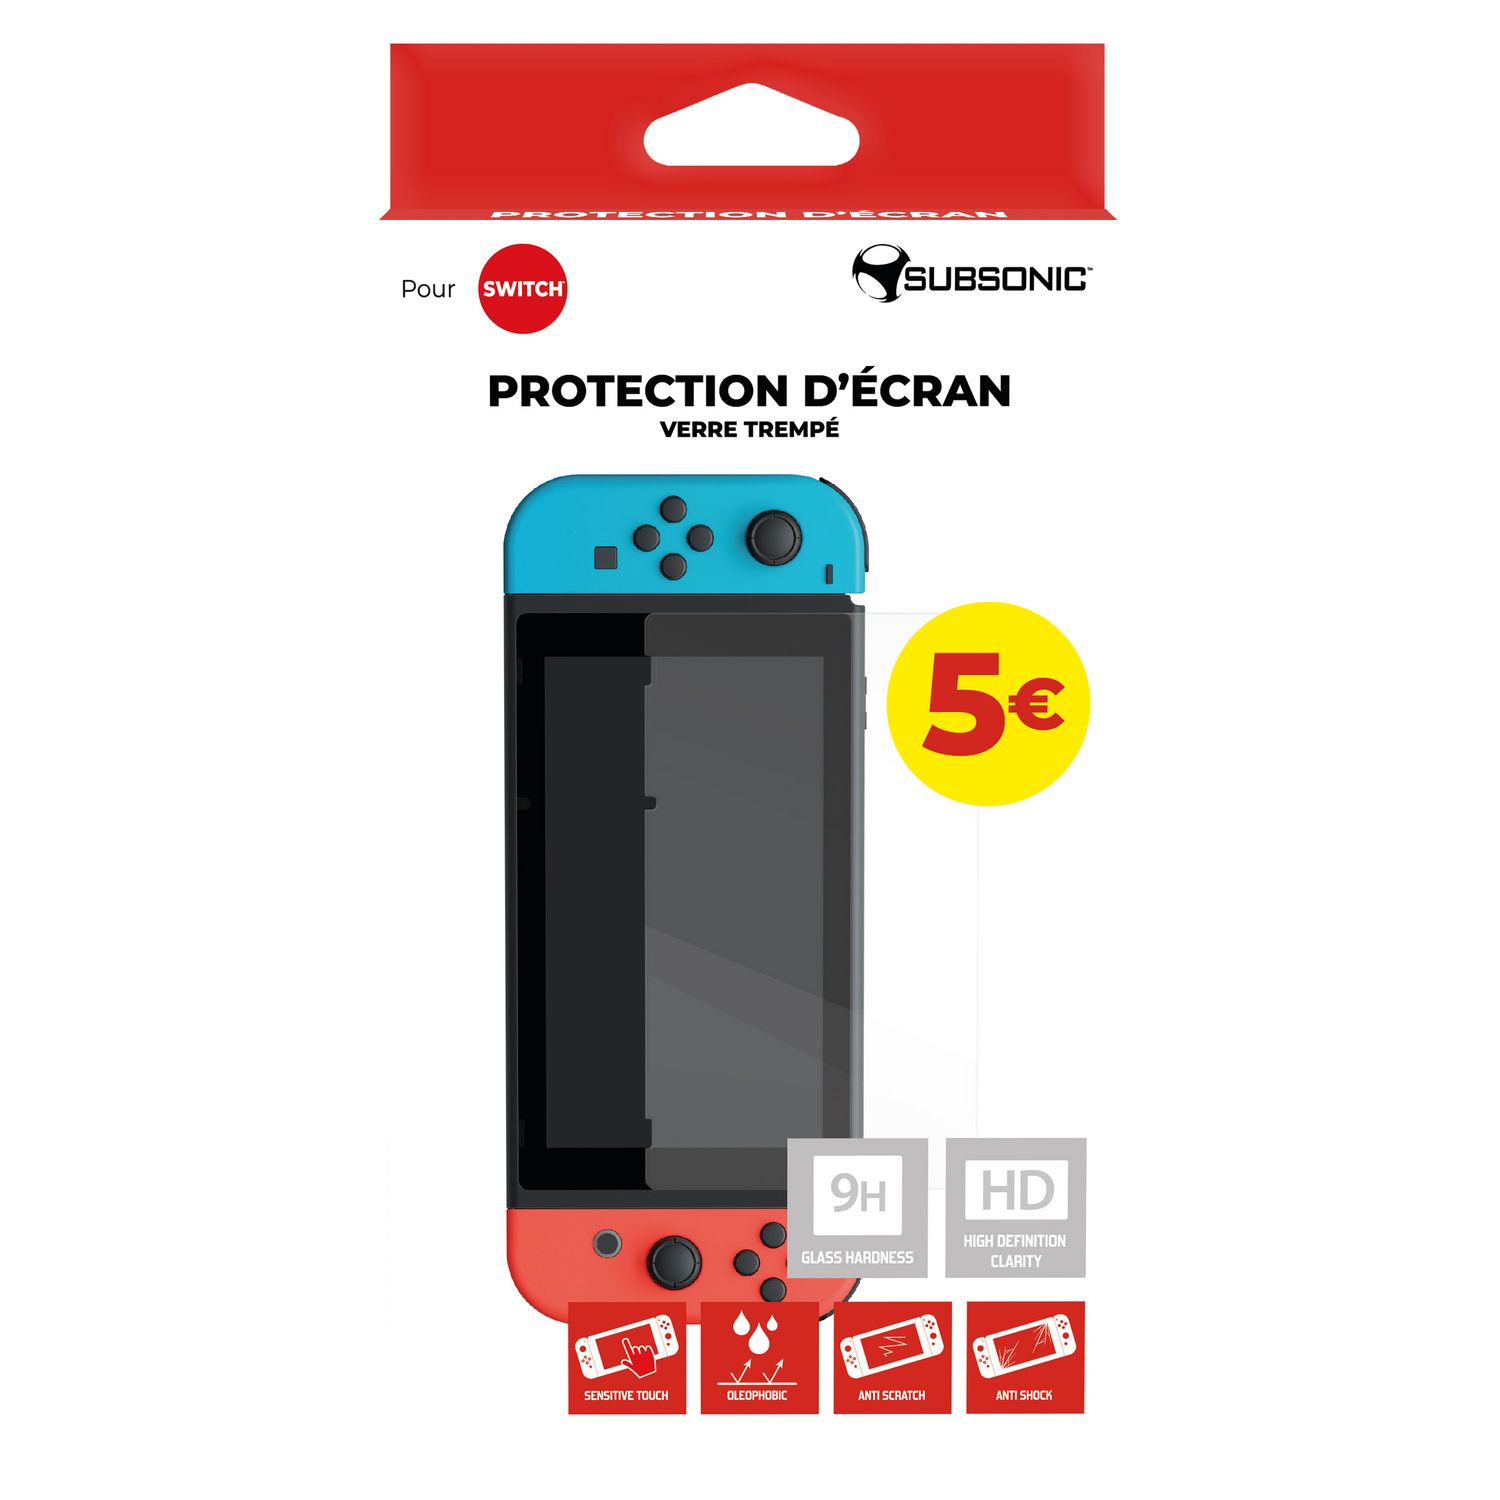 Subsonic Coque de protection pour Switch Oled pas cher 